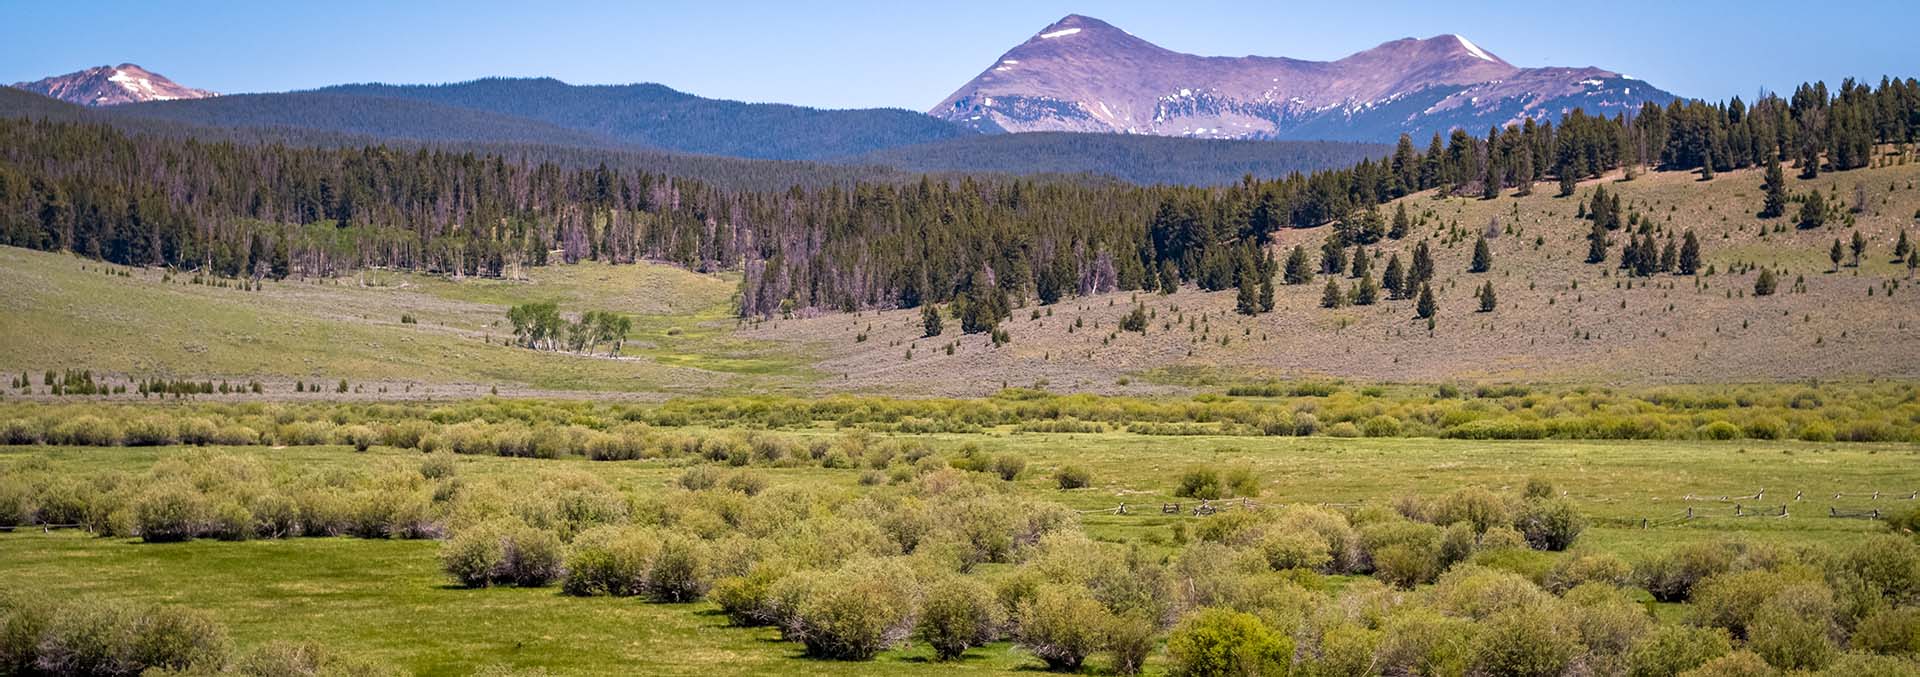 montana hunting ranch for sale arrow ranch